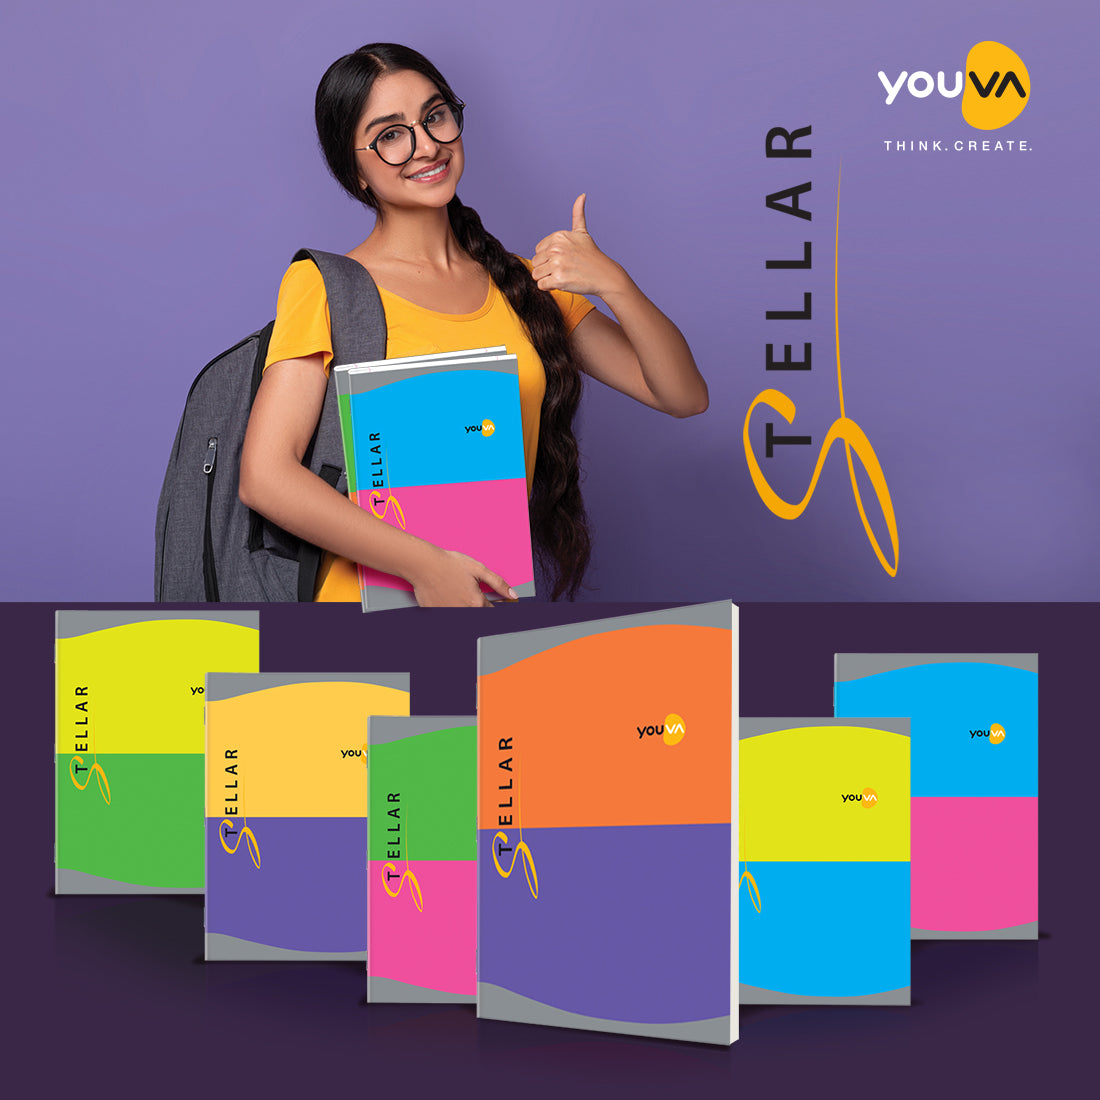 Navneet Youva Stellar | Soft Bound upgraded Long Book for students | A4 size- 21 cm x 29.7 cm | Single Line | 100 Pages | Pack of 3